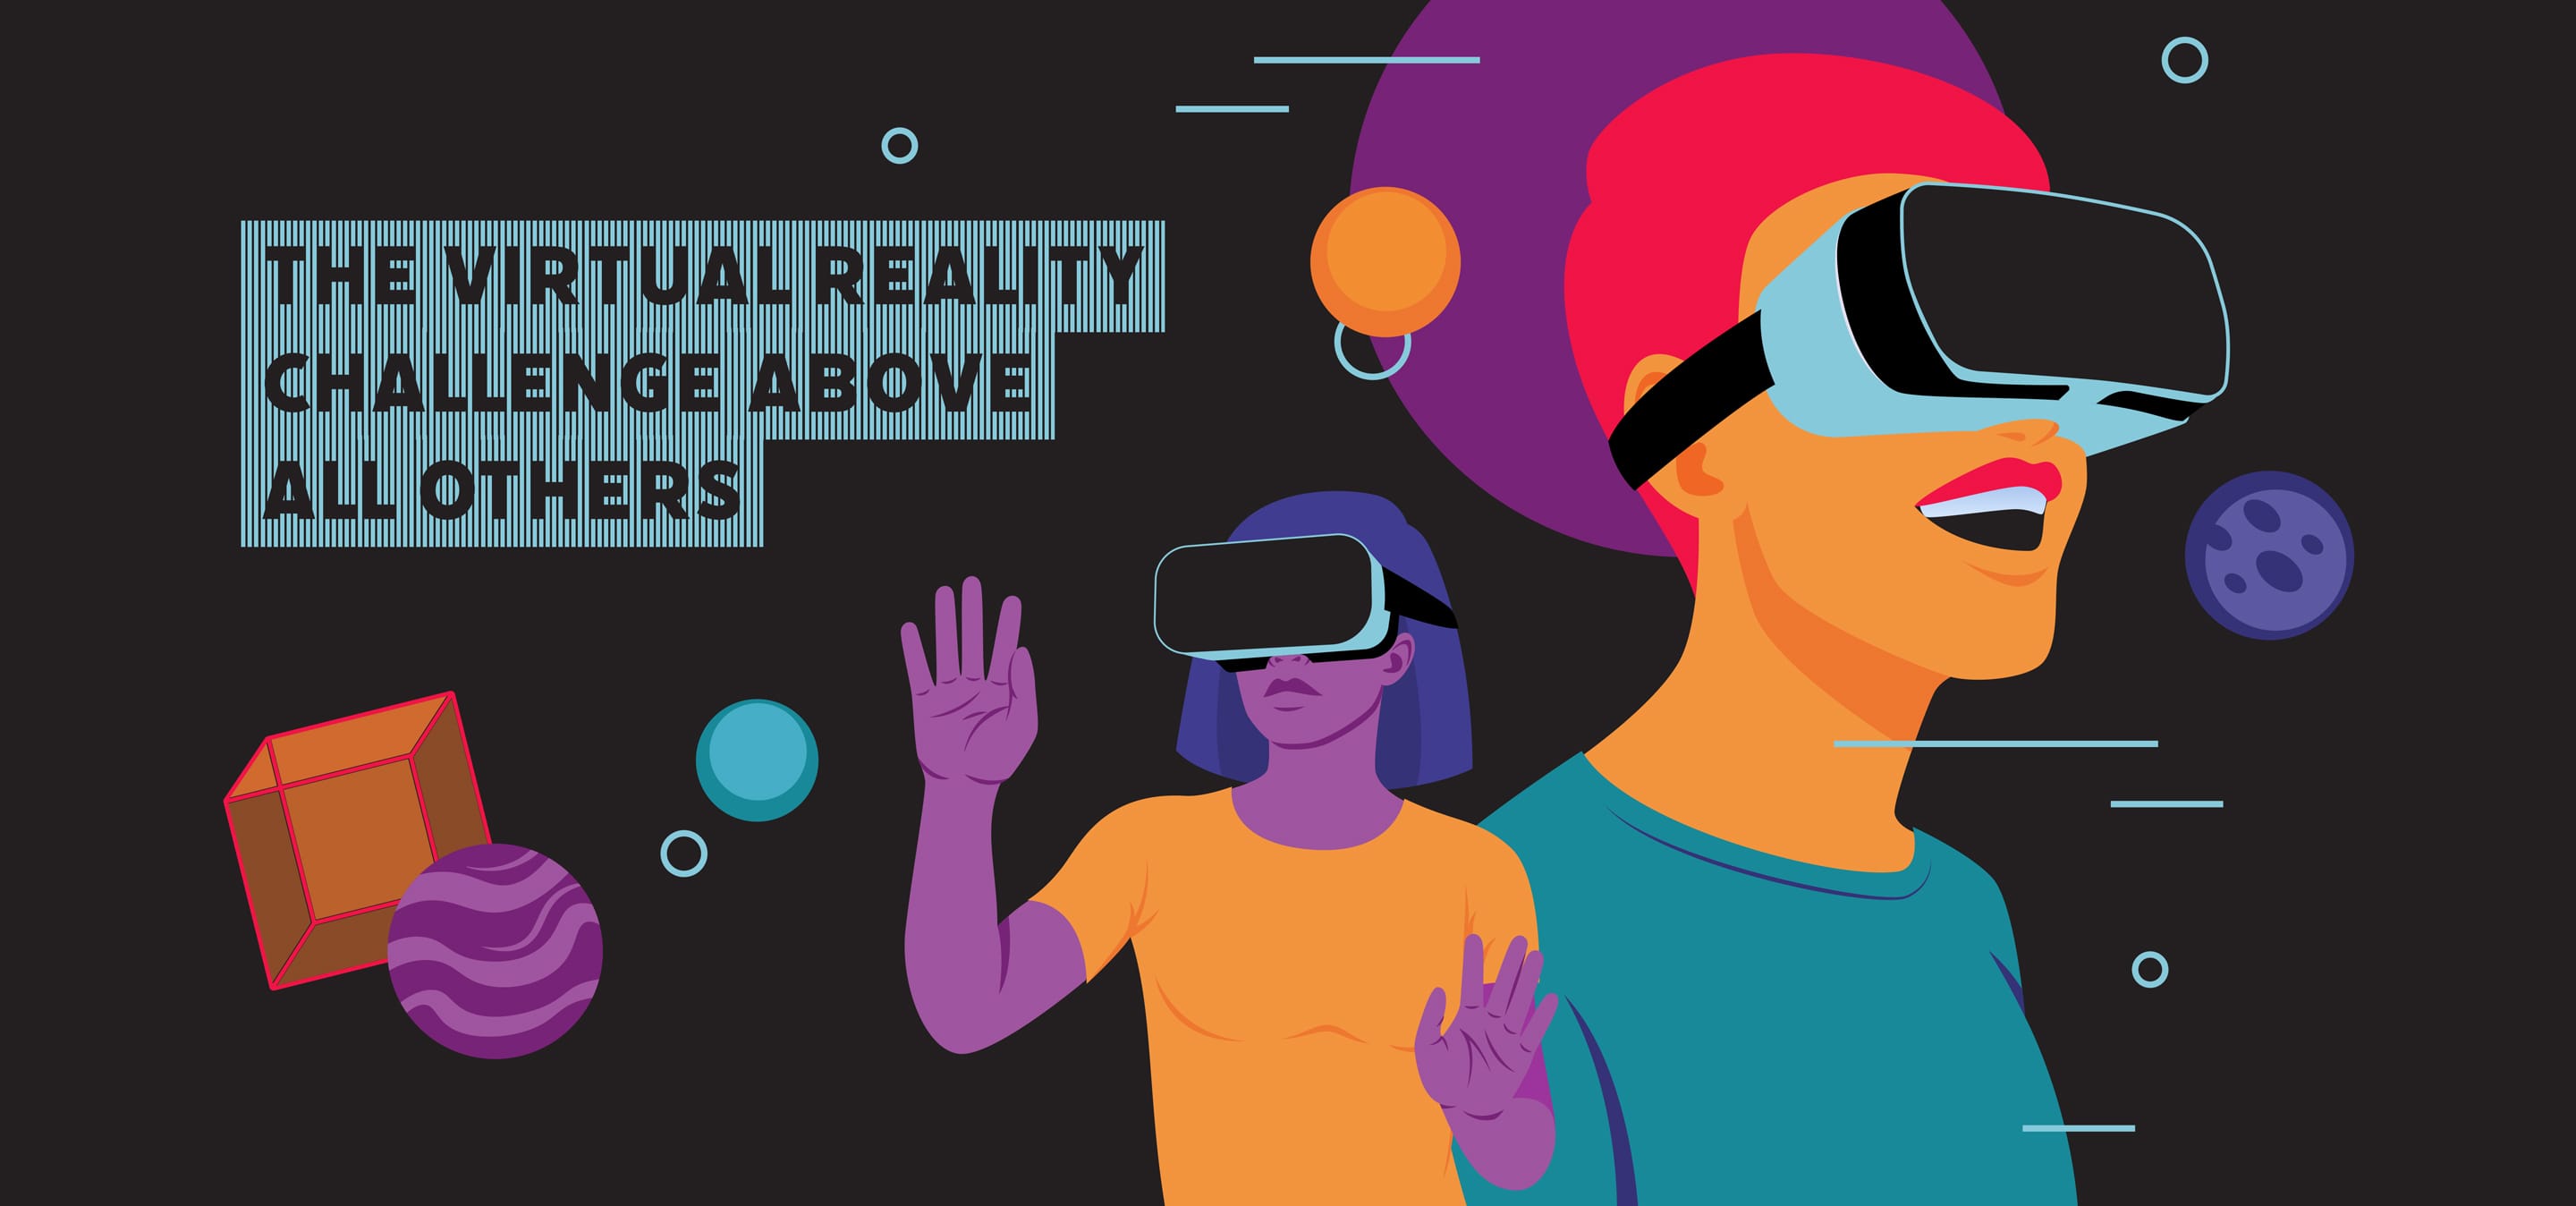 the virtual reality challenge above all others